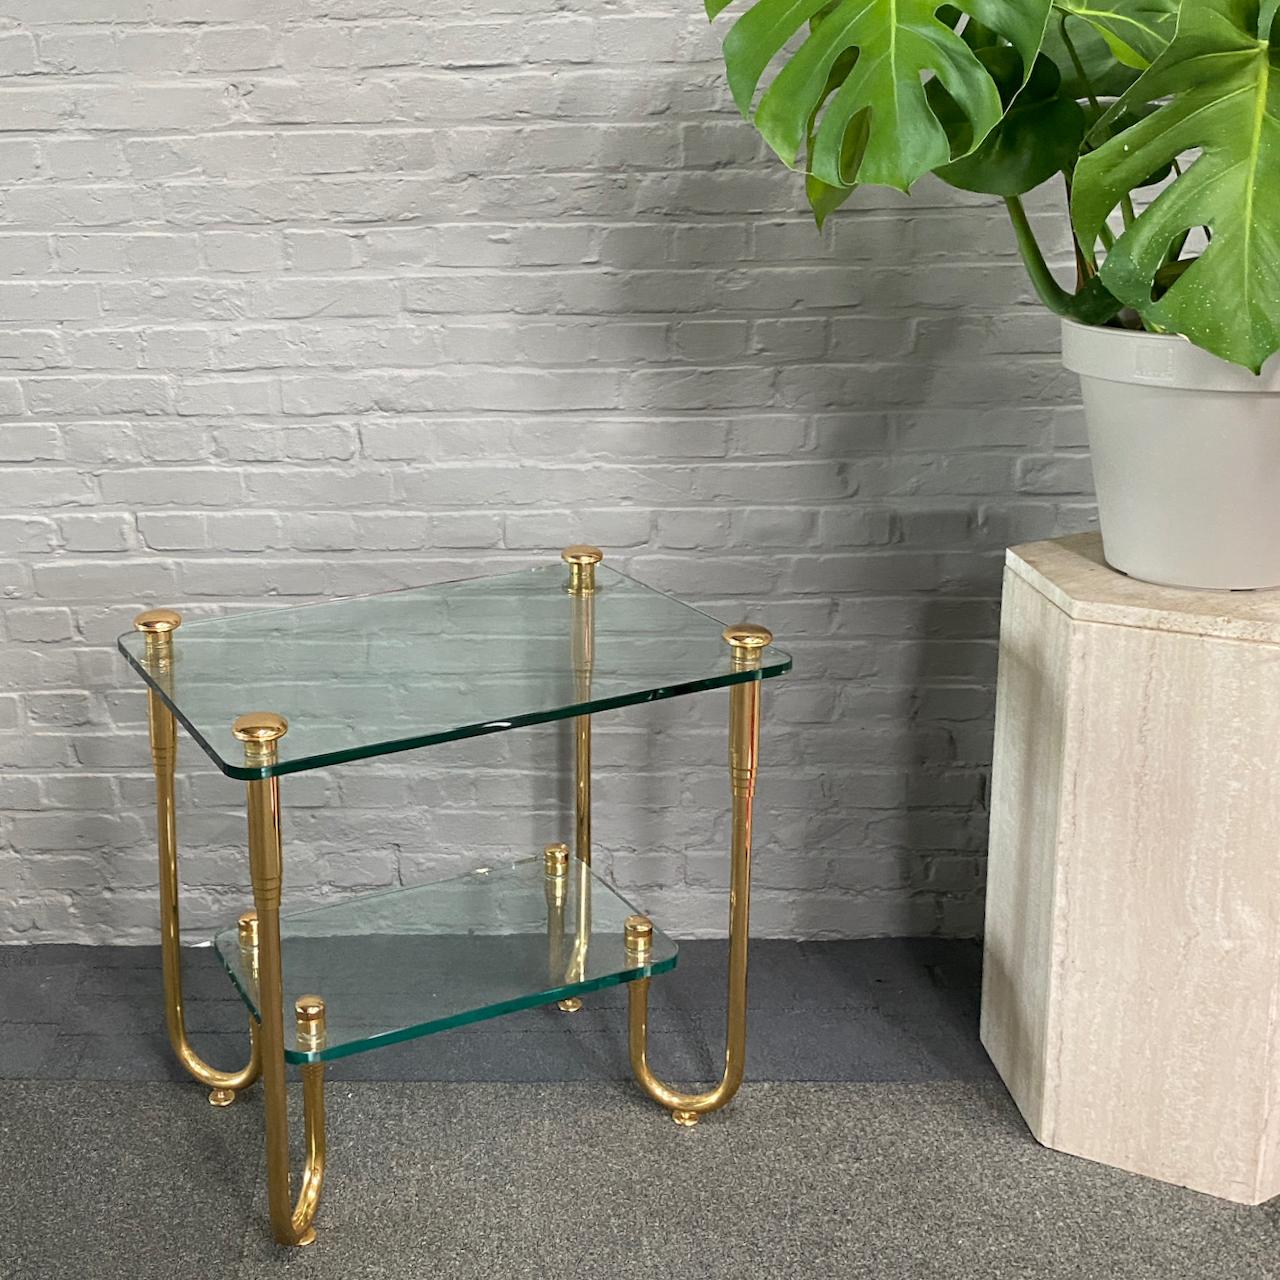 HOLLYWOOD REGENCY GOLD PLATED & GLASS SIDE TABLE

Side table
Gold plated
1,2cm thick glass

4 bended gilded feet
center glass tray

Hollywood Regency style
1980's
Italy

Condition:
The table is almost scratch free.
Amazing vintage condition
The